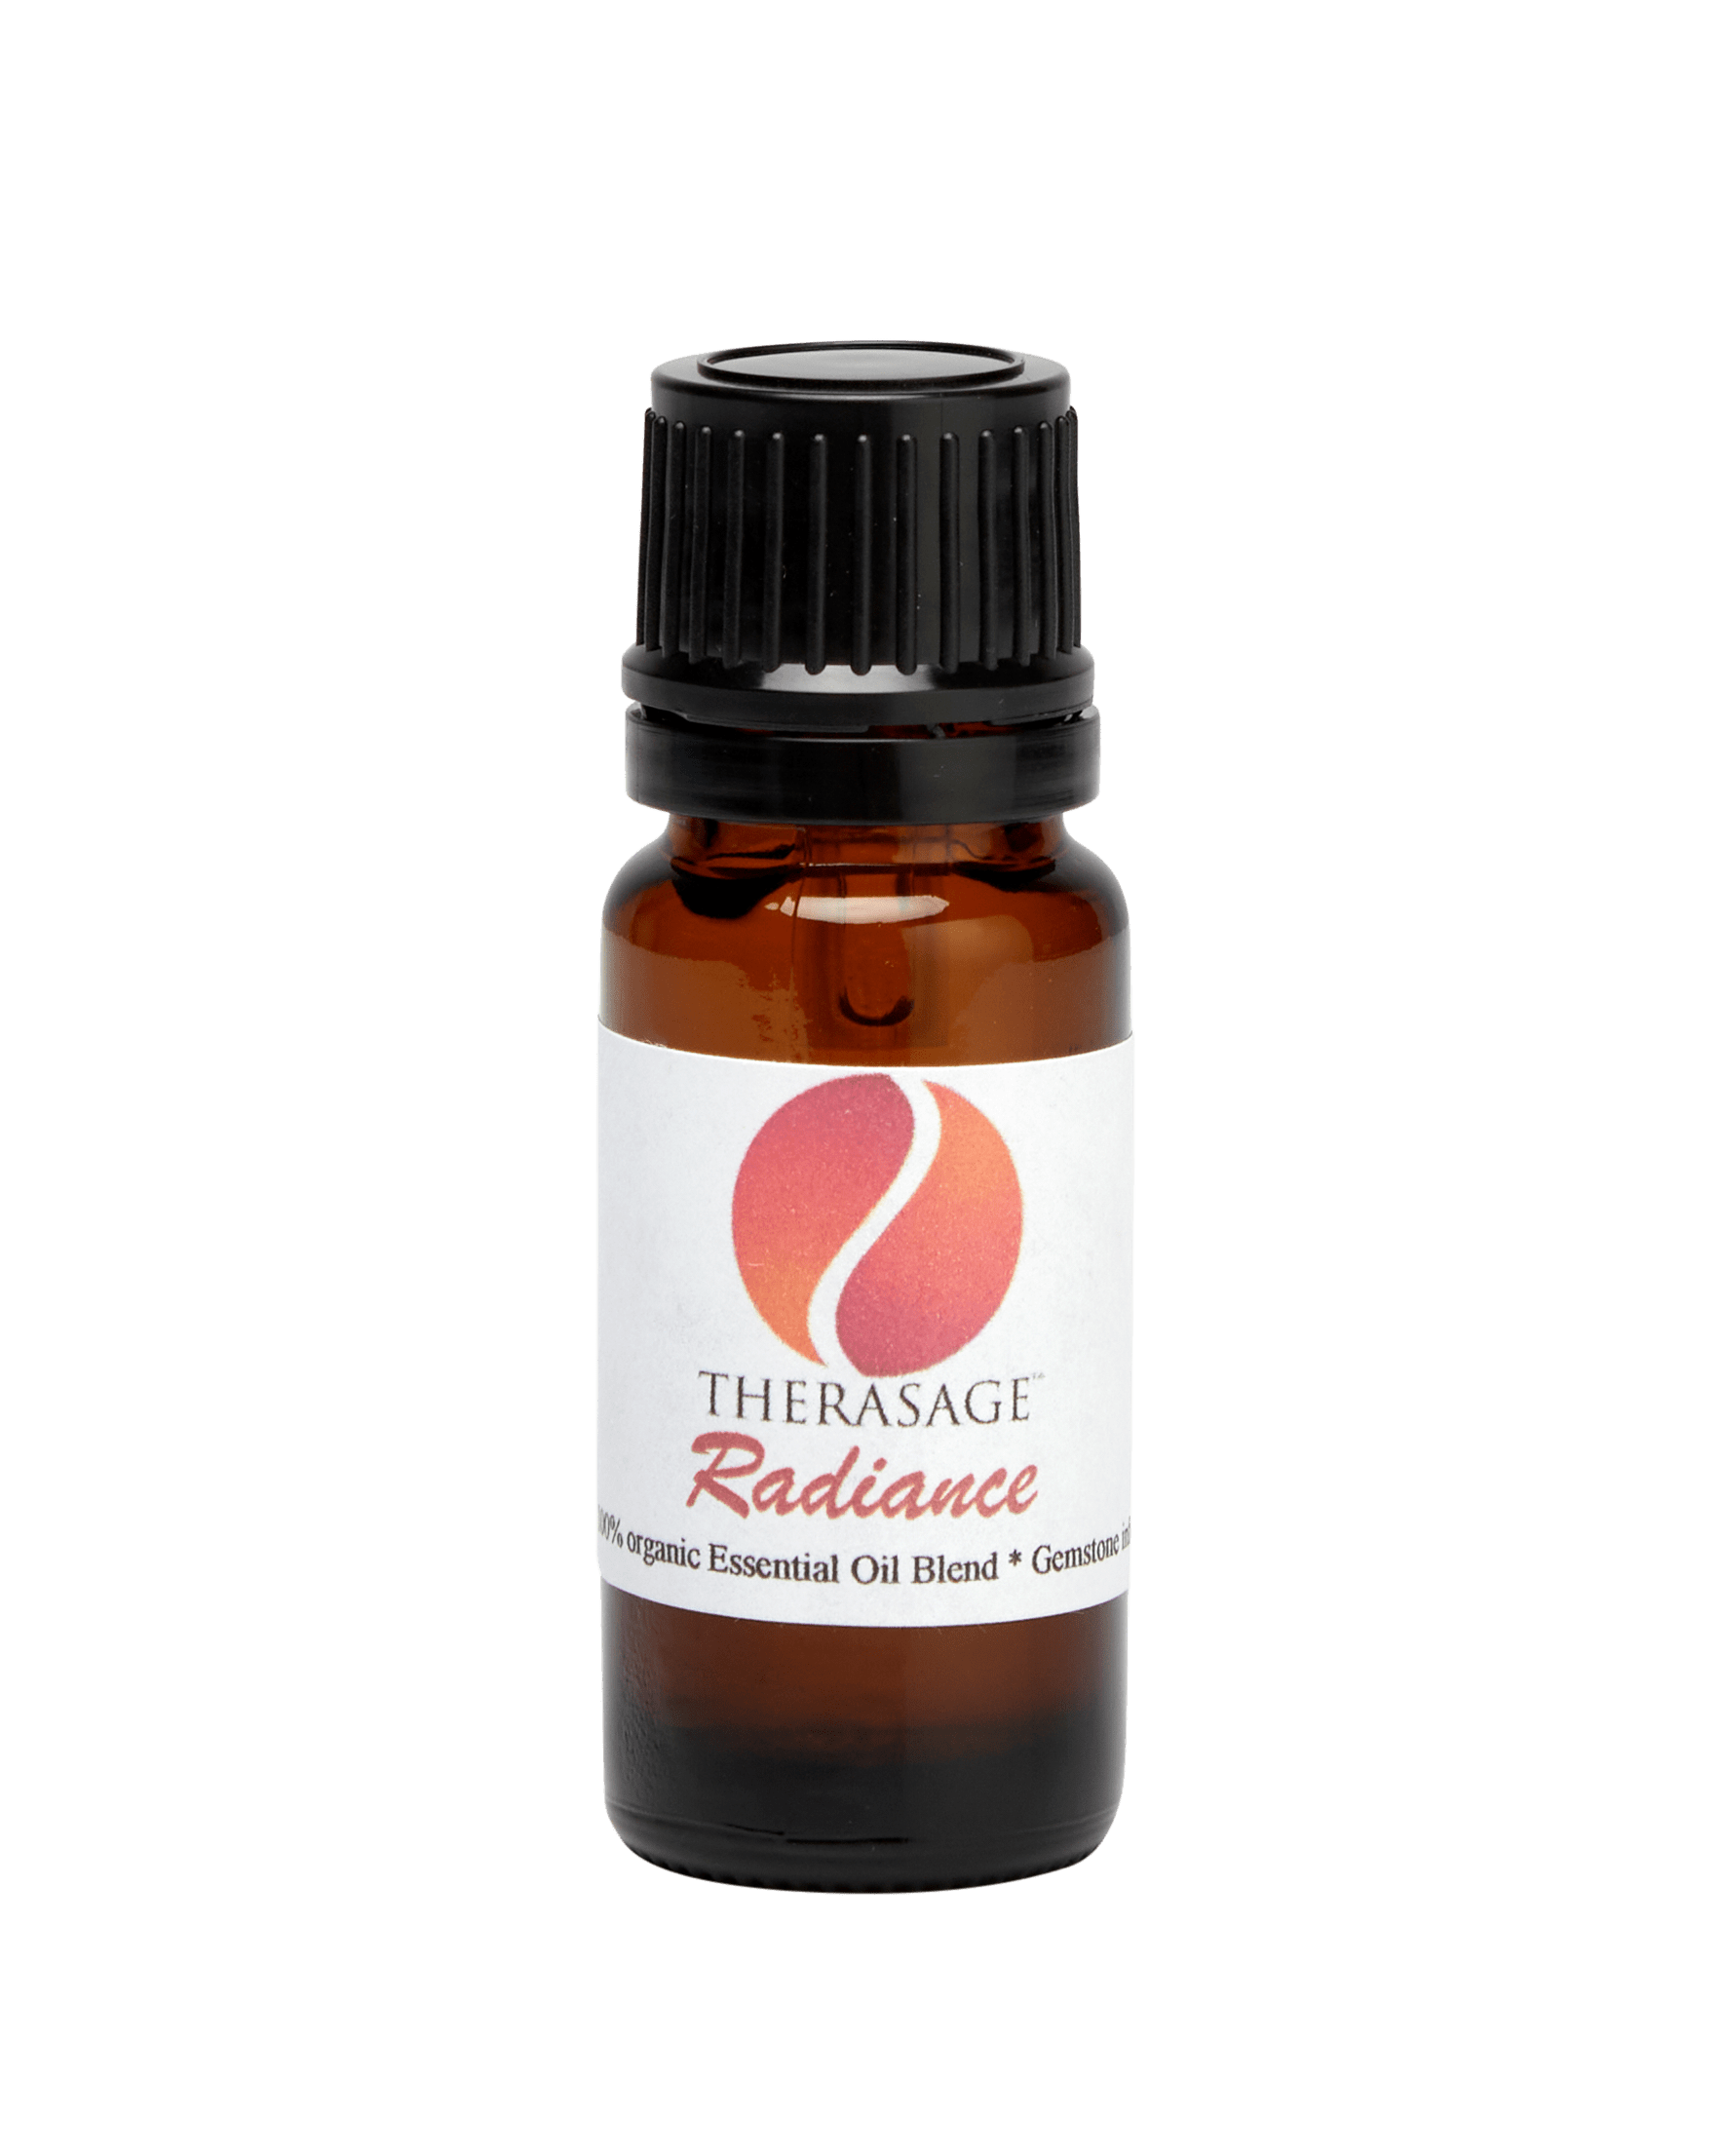 Therasage All Radiance Therasage TheraEssential Oil Blend